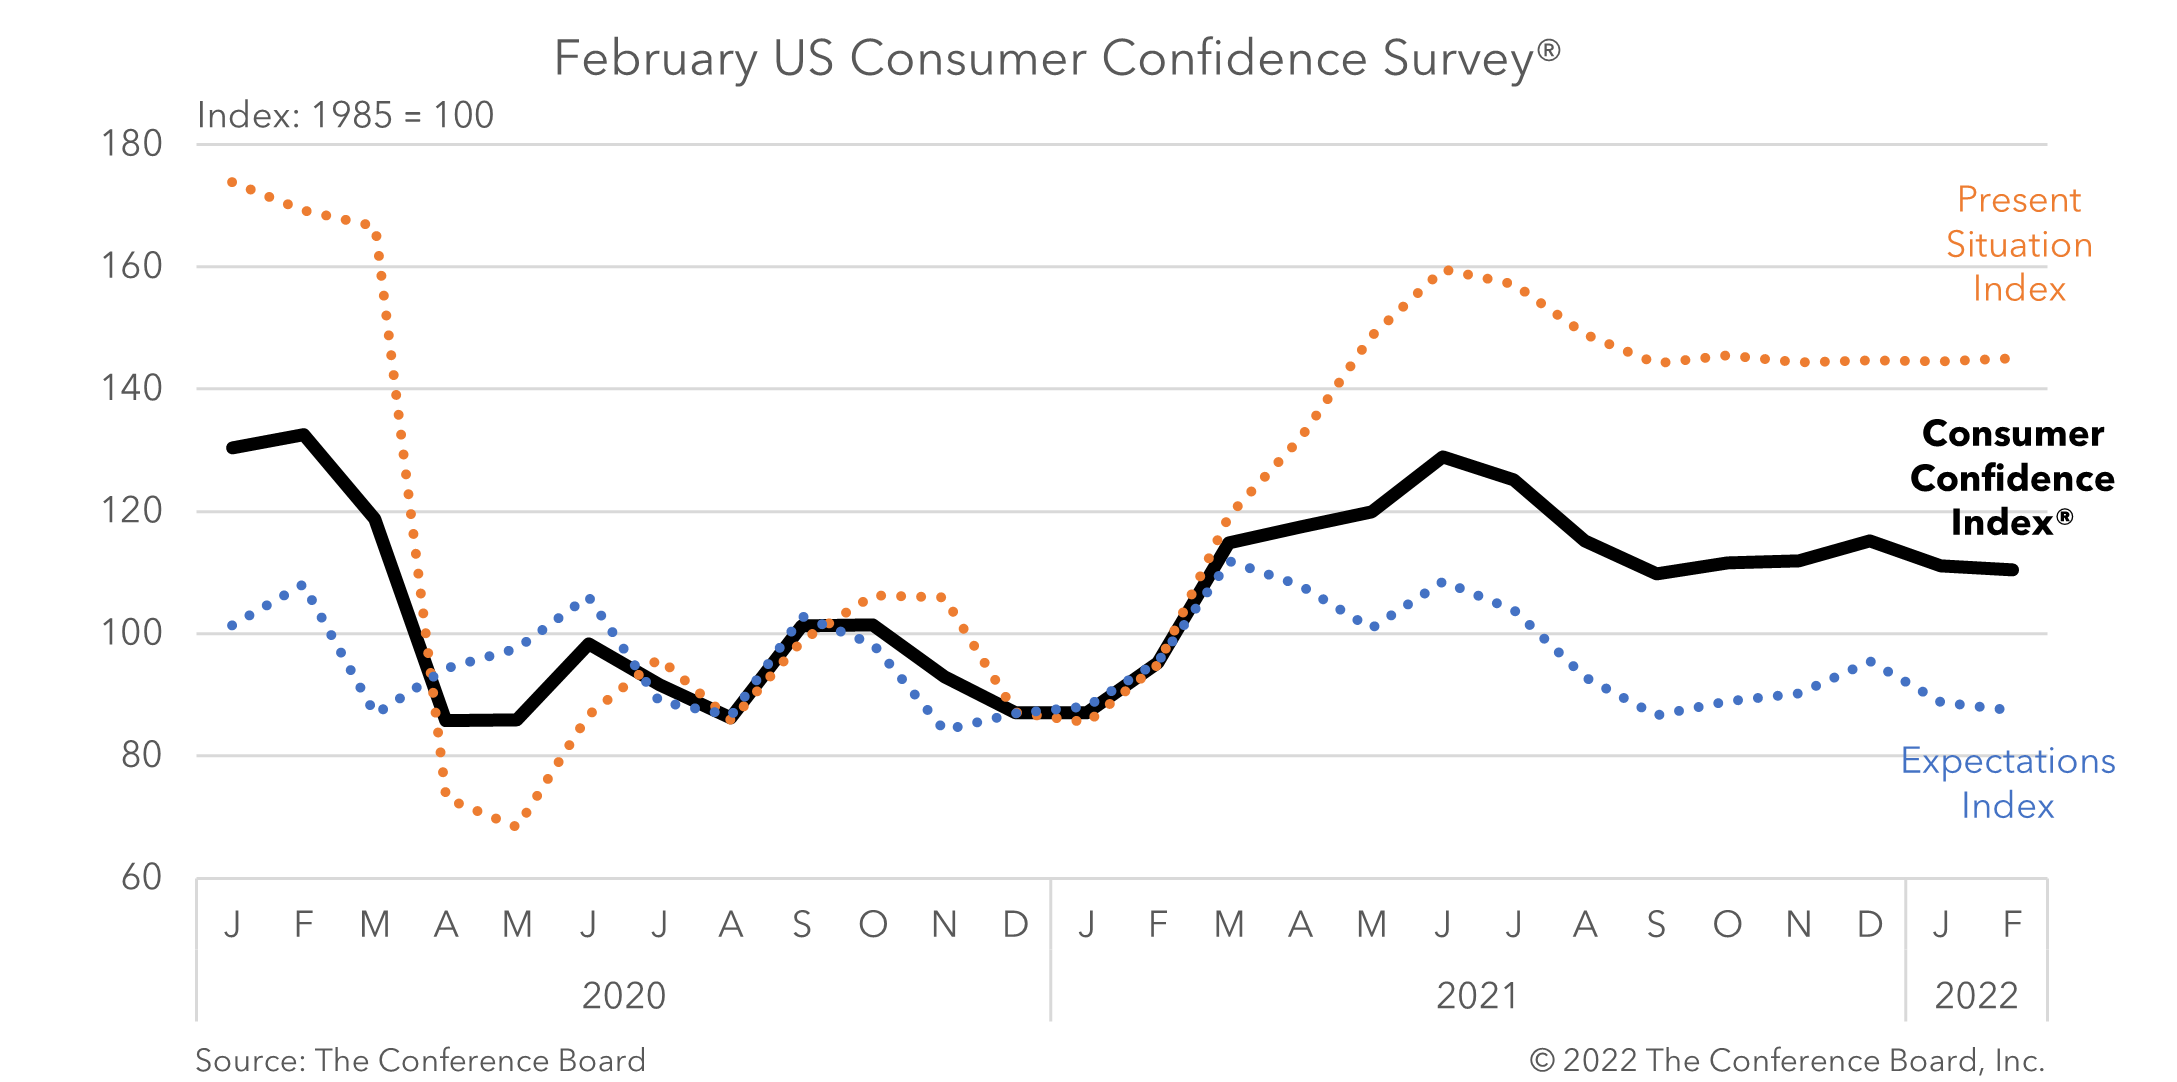 Consumer Confidence Declined for Second Consecutive Month in February